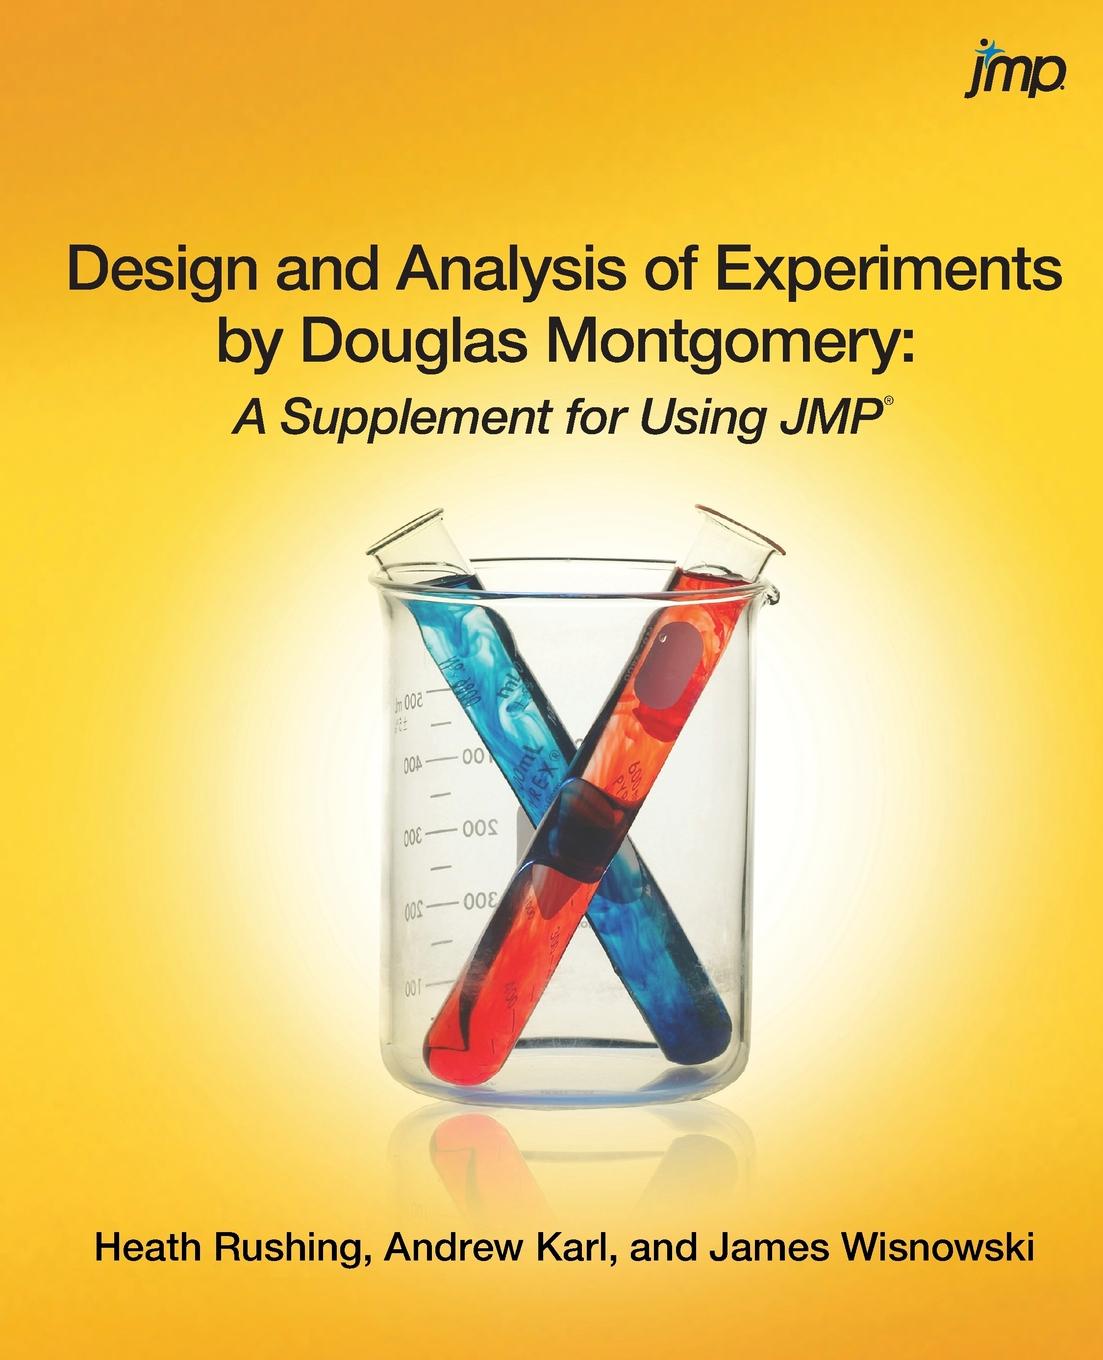 Design and Analysis of Experiments by Douglas Montgomery. A Supplement for Using JMP